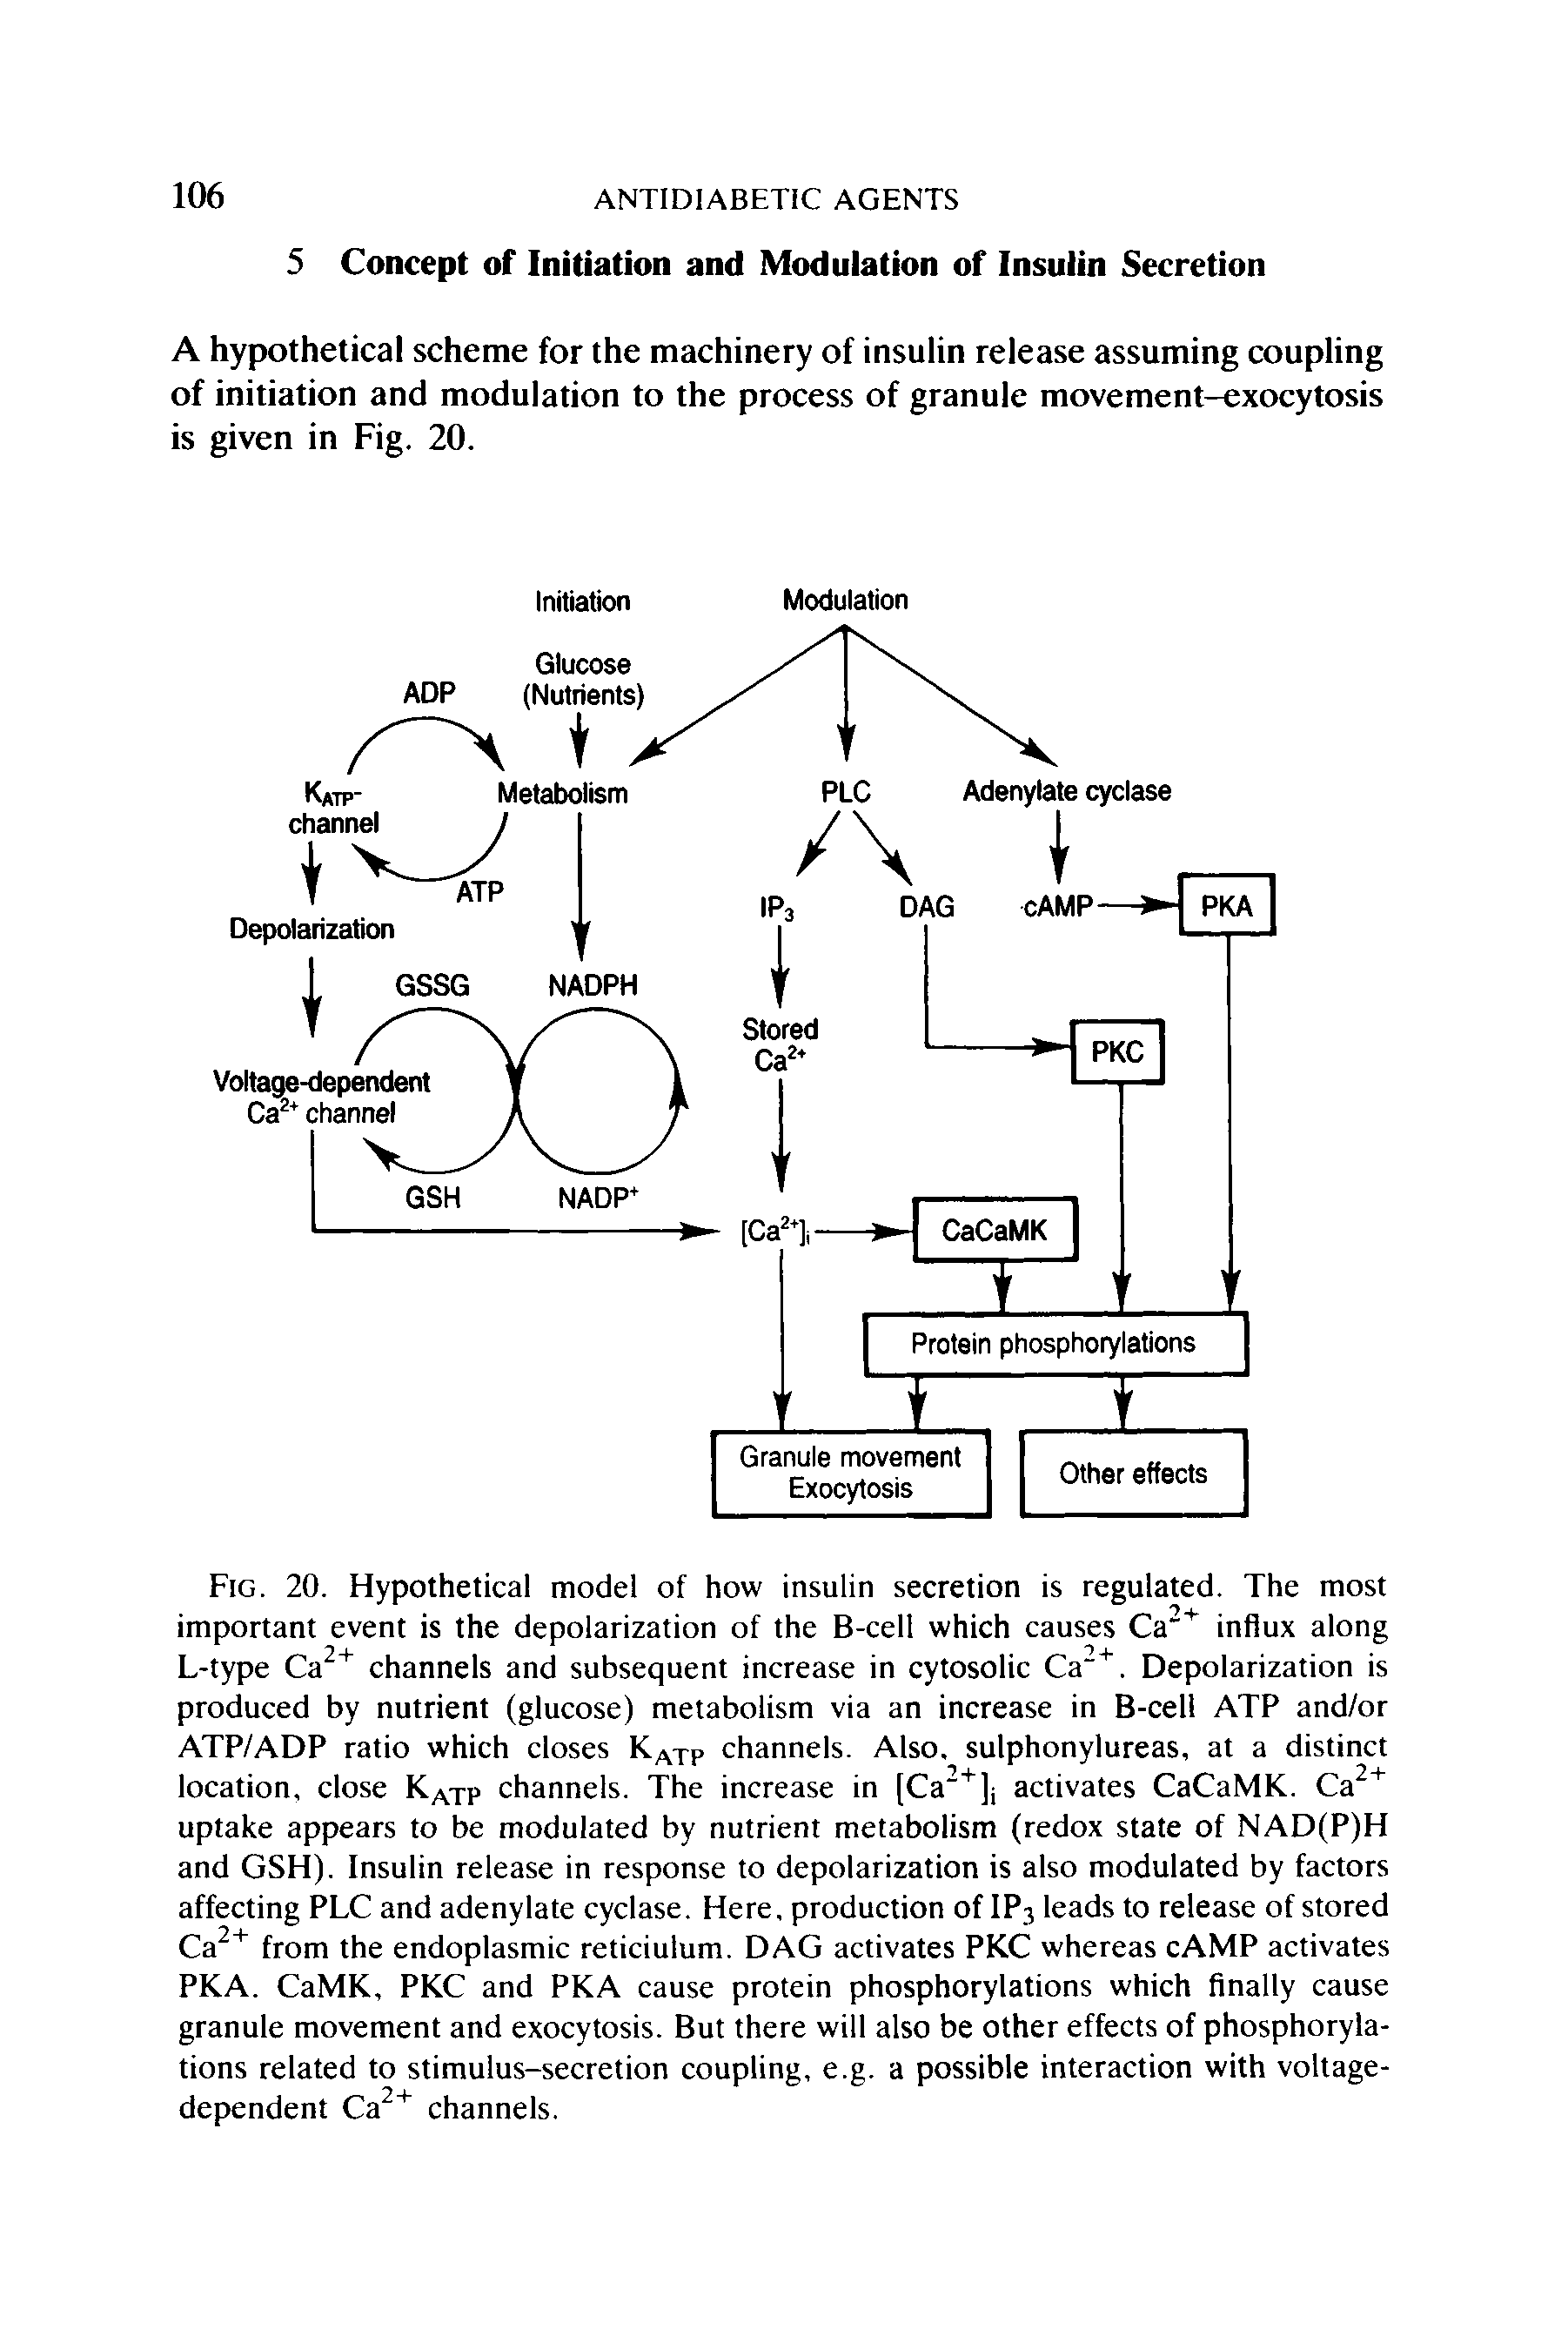 Fig. 20. Hypothetical model of how insulin secretion is regulated. The most important event is the depolarization of the B-cell which causes Ca"+ influx along L-type Ca2+ channels and subsequent increase in cytosolic Ca"+. Depolarization is produced by nutrient (glucose) metabolism via an increase in B-cell ATP and/or ATP/ADP ratio which closes KAXP channels. Also, sulphonylureas, at a distinct location, close KATP channels. The increase in [Ca2+]j activates CaCaMK. Ca2+ uptake appears to be modulated by nutrient metabolism (redox state of NAD(P)H and GSH). Insulin release in response to depolarization is also modulated by factors affecting PLC and adenylate cyclase. Here, production of IP3 leads to release of stored Ca2+ from the endoplasmic reticiulum. DAG activates PKC whereas cAMP activates PKA. CaMK, PKC and PKA cause protein phosphorylations which finally cause granule movement and exocytosis. But there will also be other effects of phosphorylations related to stimulus-secretion coupling, e.g. a possible interaction with voltage-dependent Ca2+ channels.